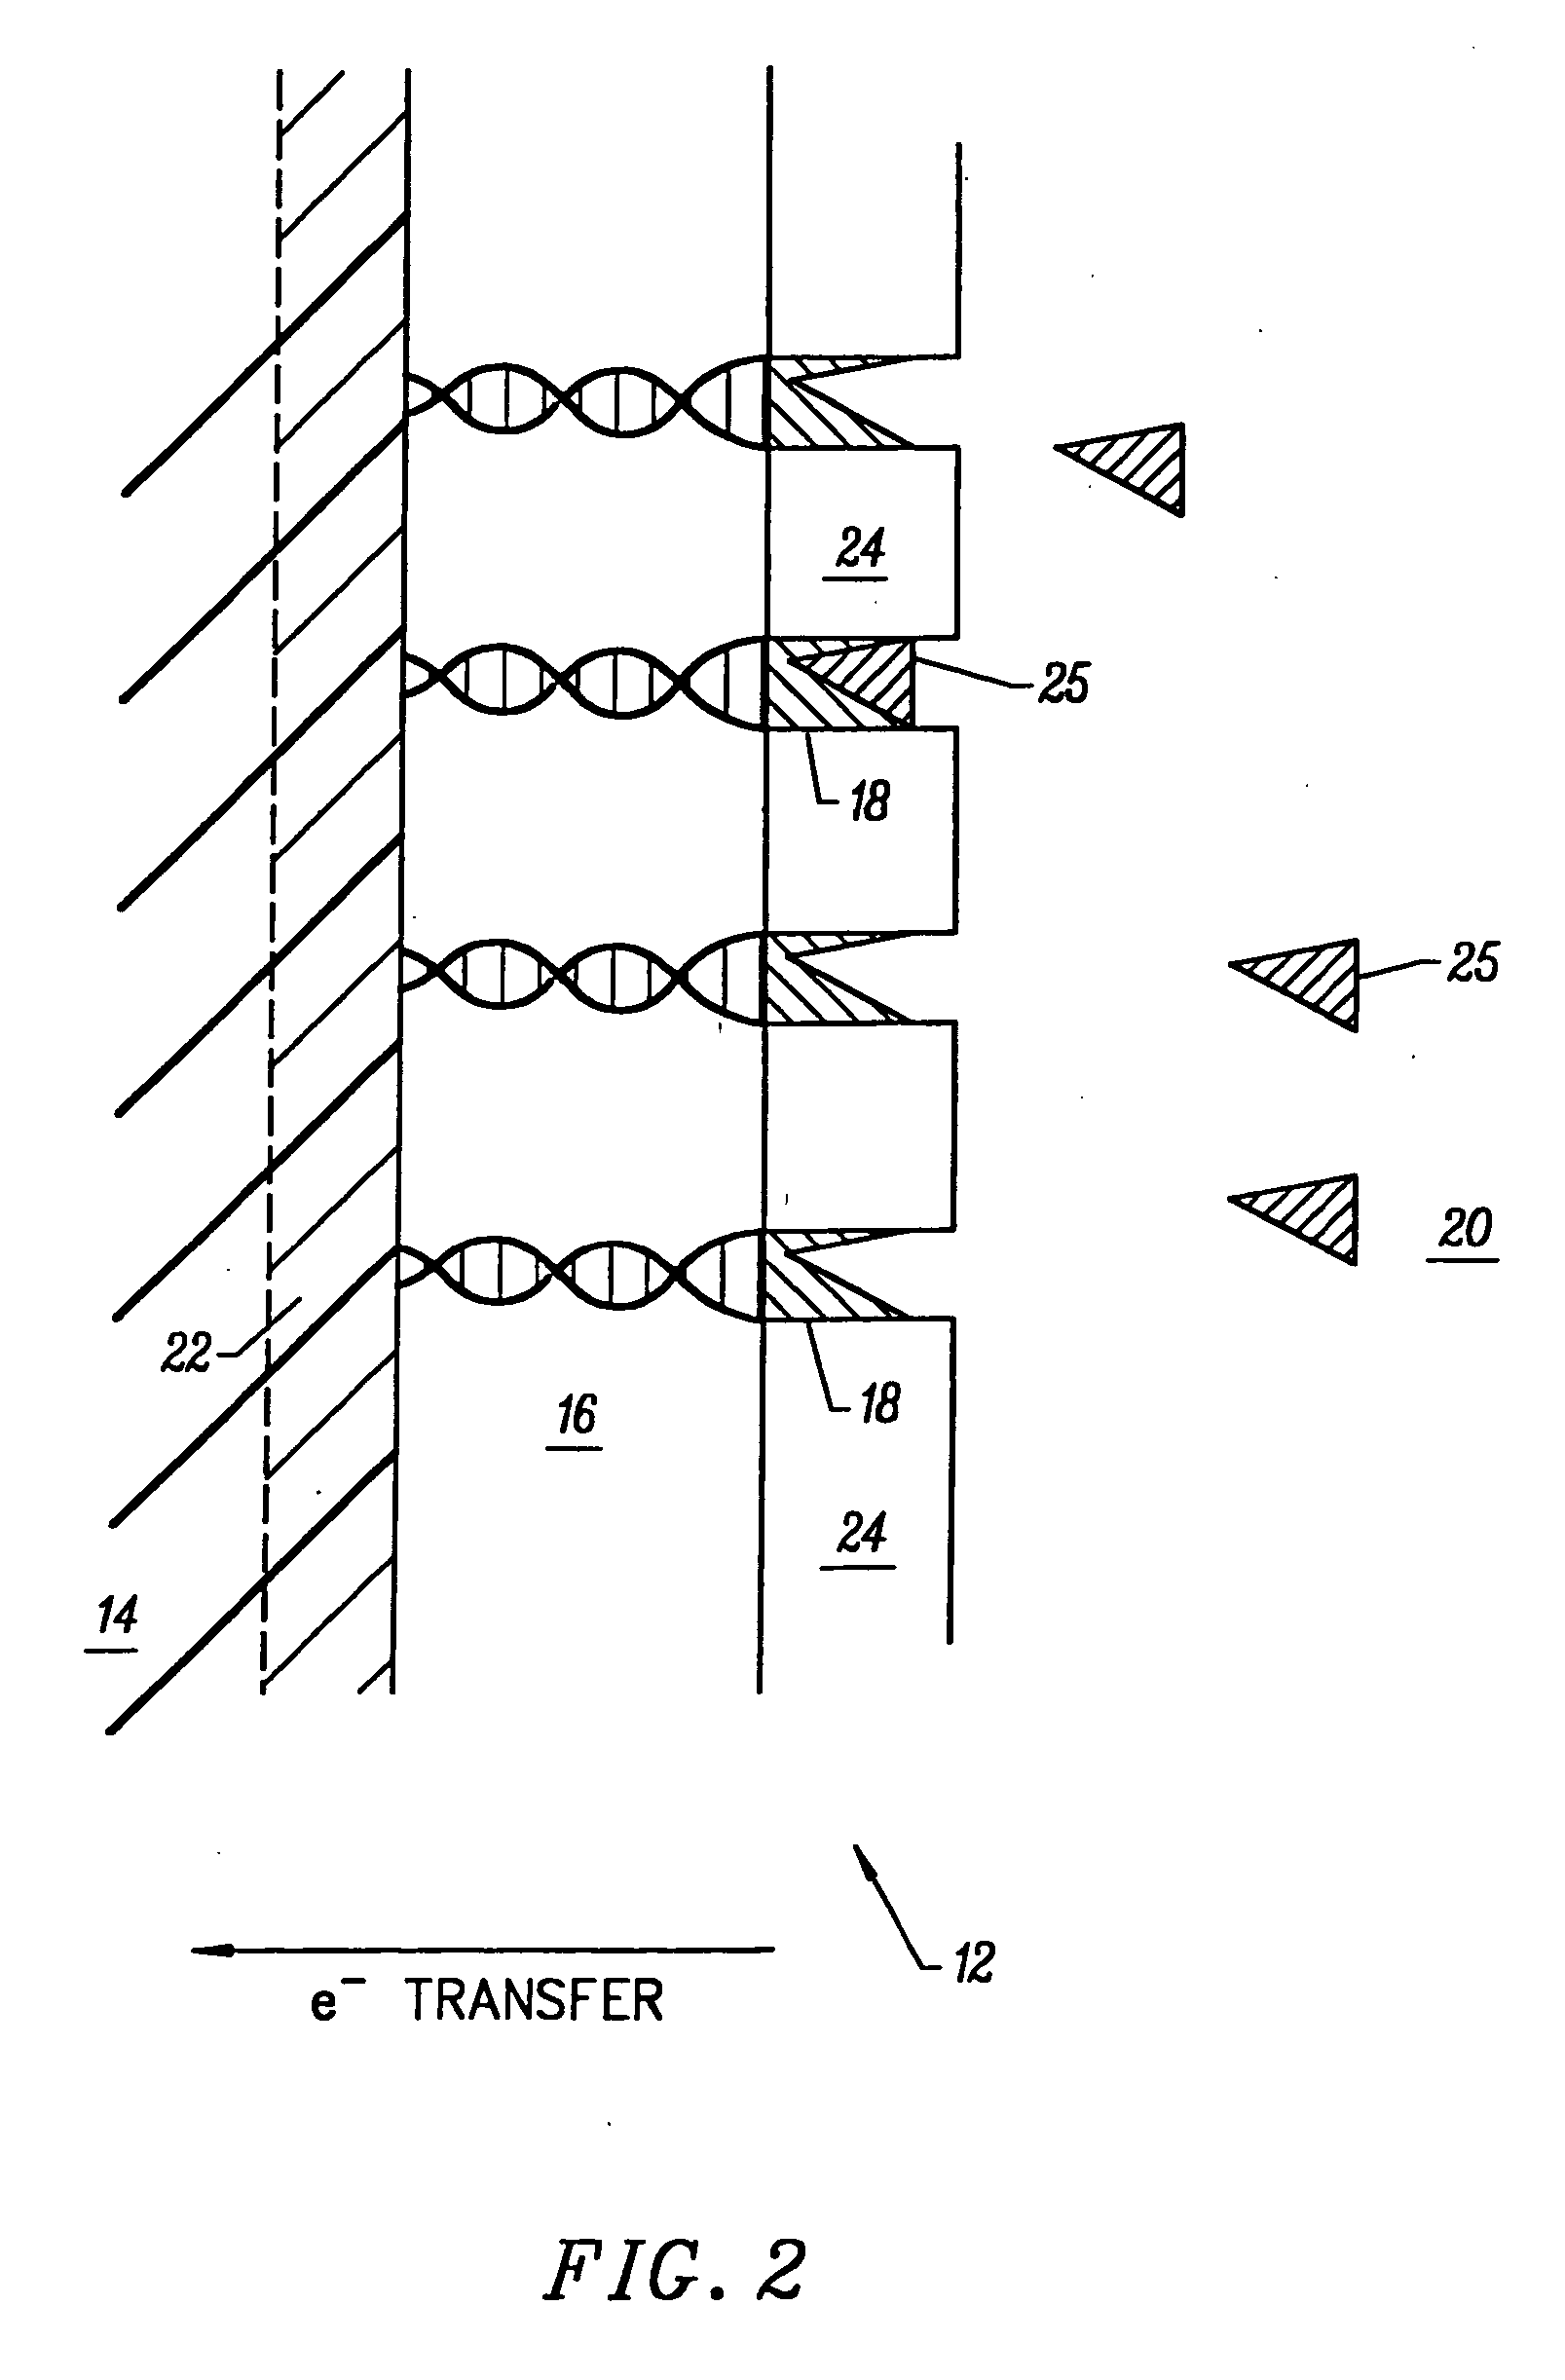 Molecular wire injection sensors